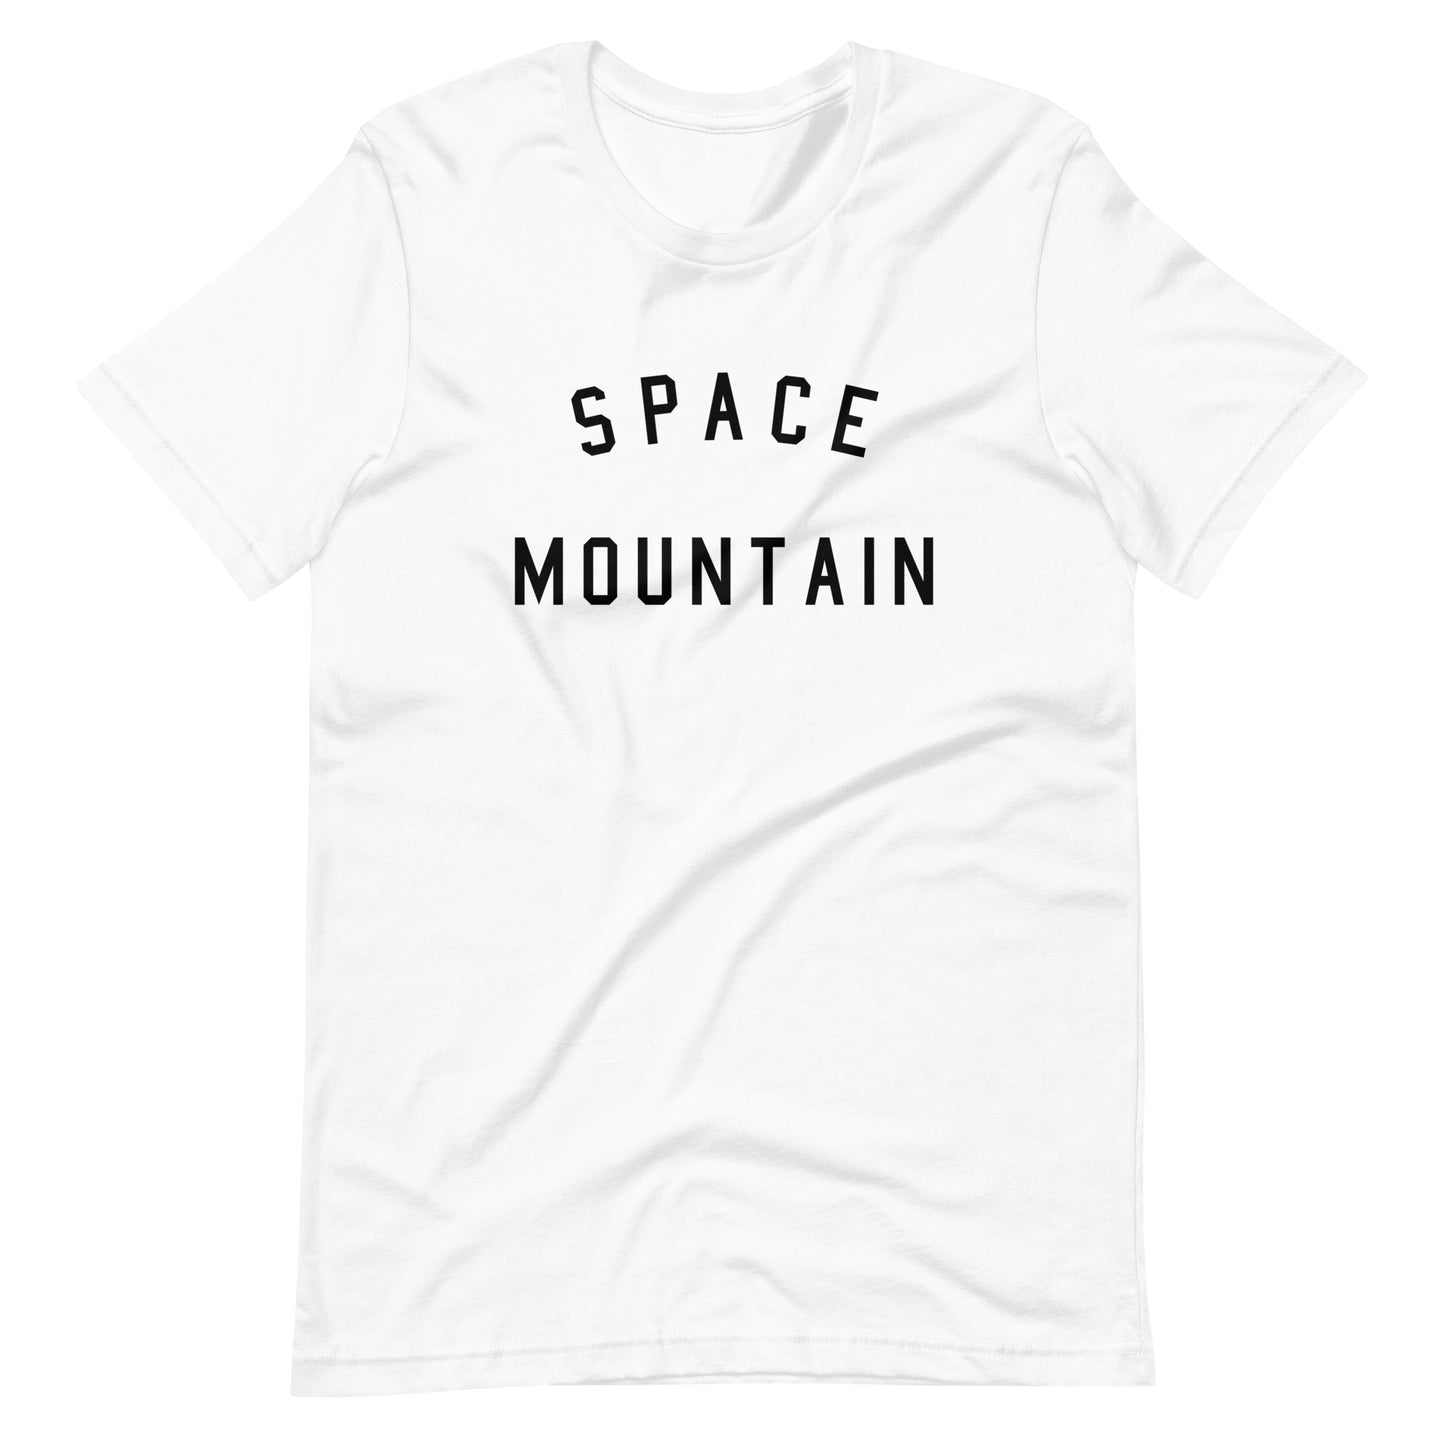 Pixie Dust Collection - Space Mountain College Print Unisex T-Shirt (more colors available)